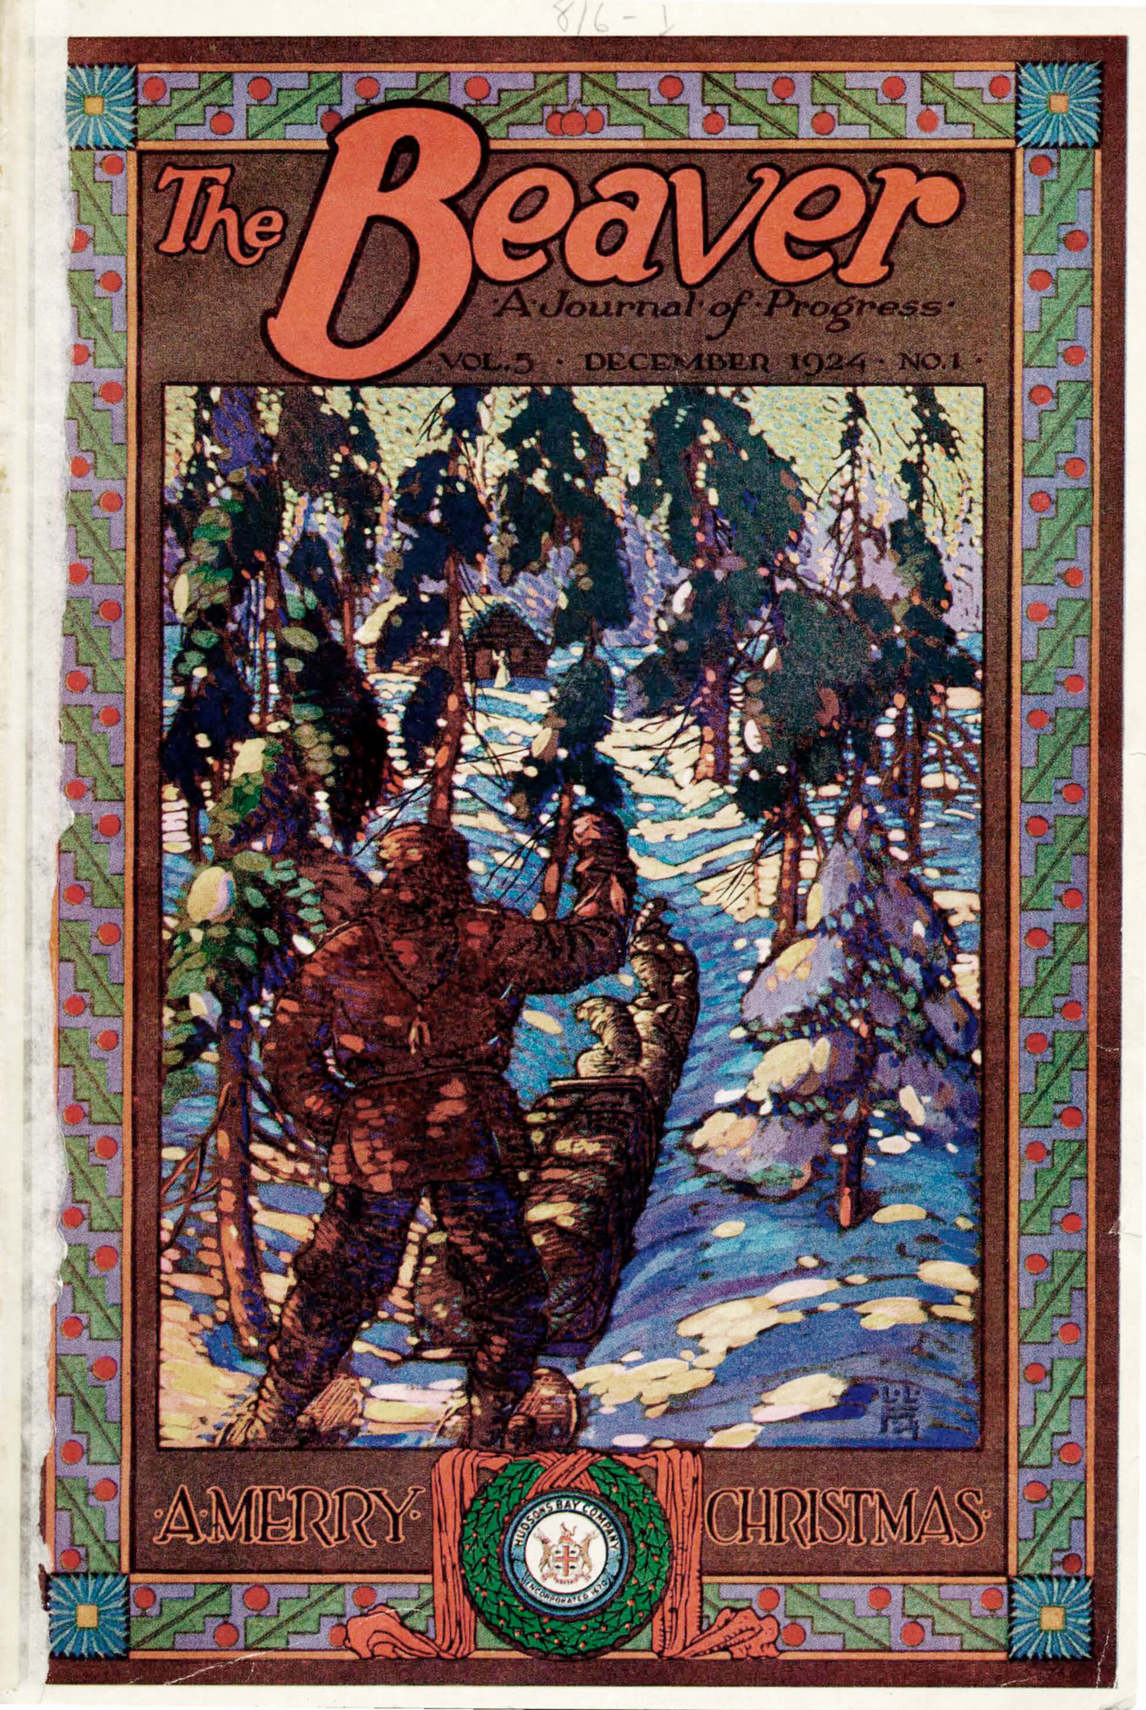 Art Canada Institute, cover image for the Hudson's Bay Company’s magazine The Beaver 5, no. 1 (December 1924)